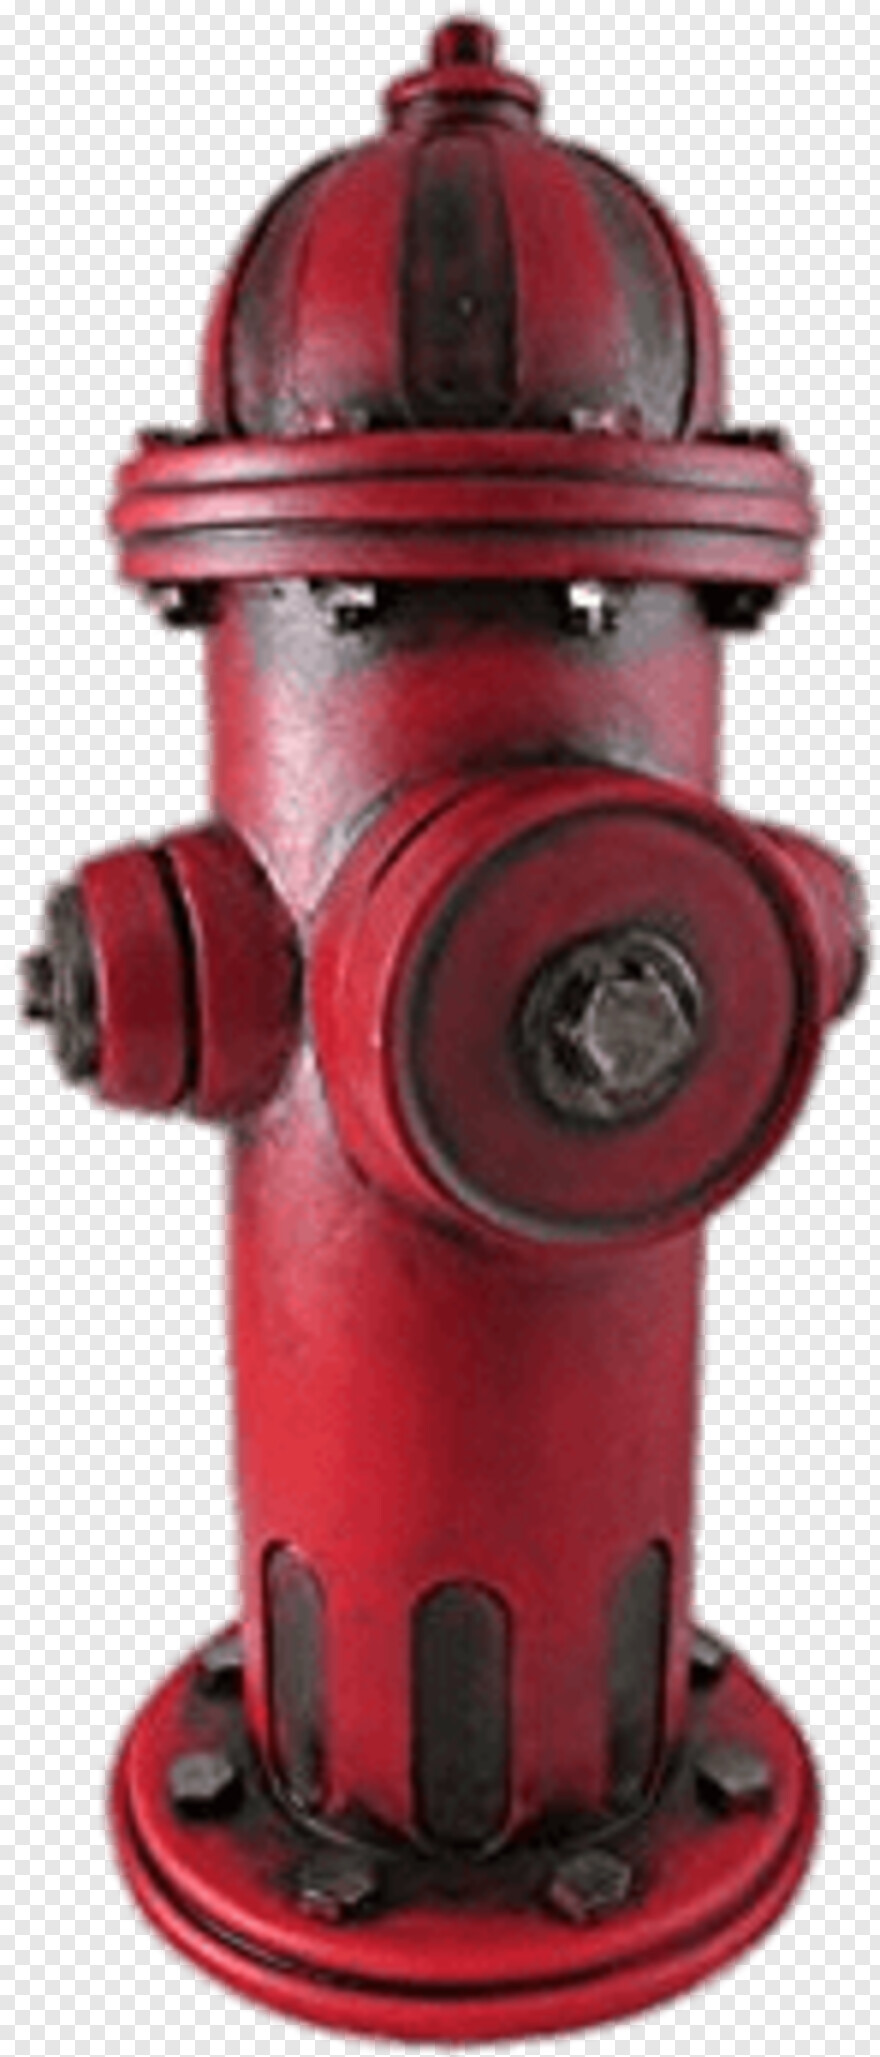 fire-hydrant # 833312